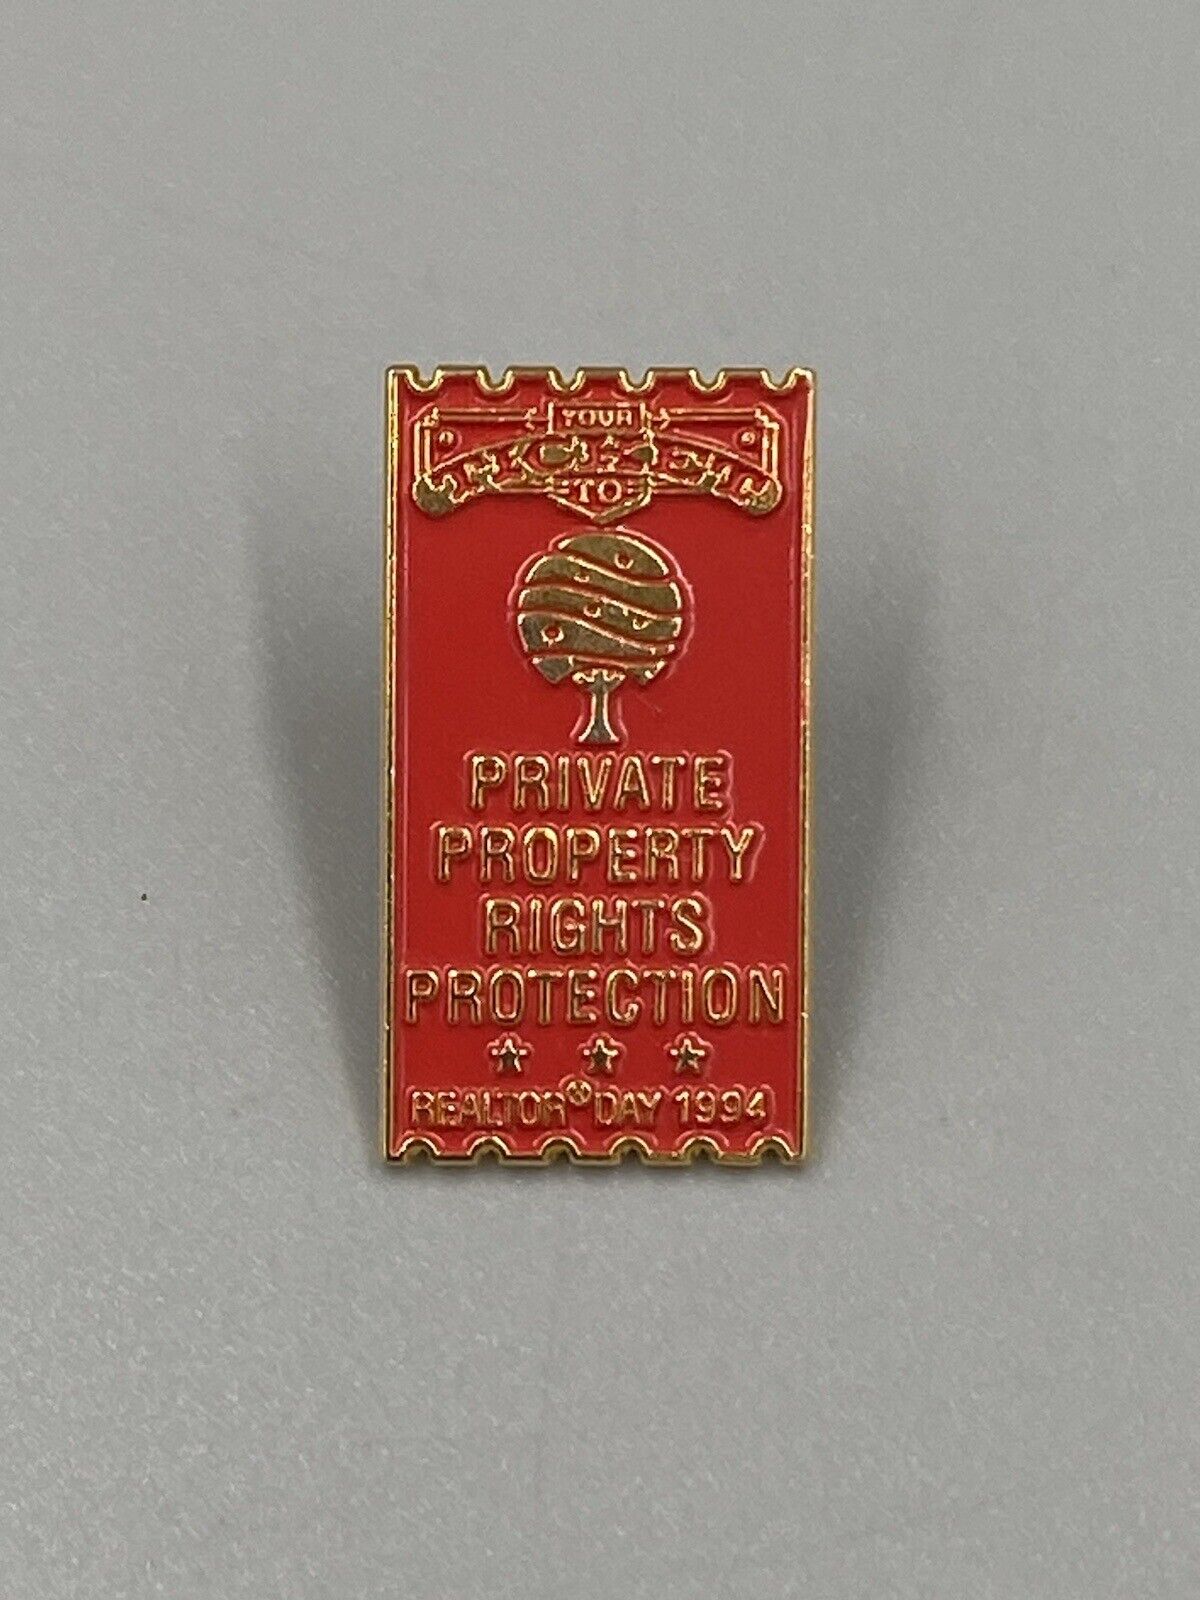 VINTAGE 1994 Realtor Day Private Property Rights Protection Lapel Pin